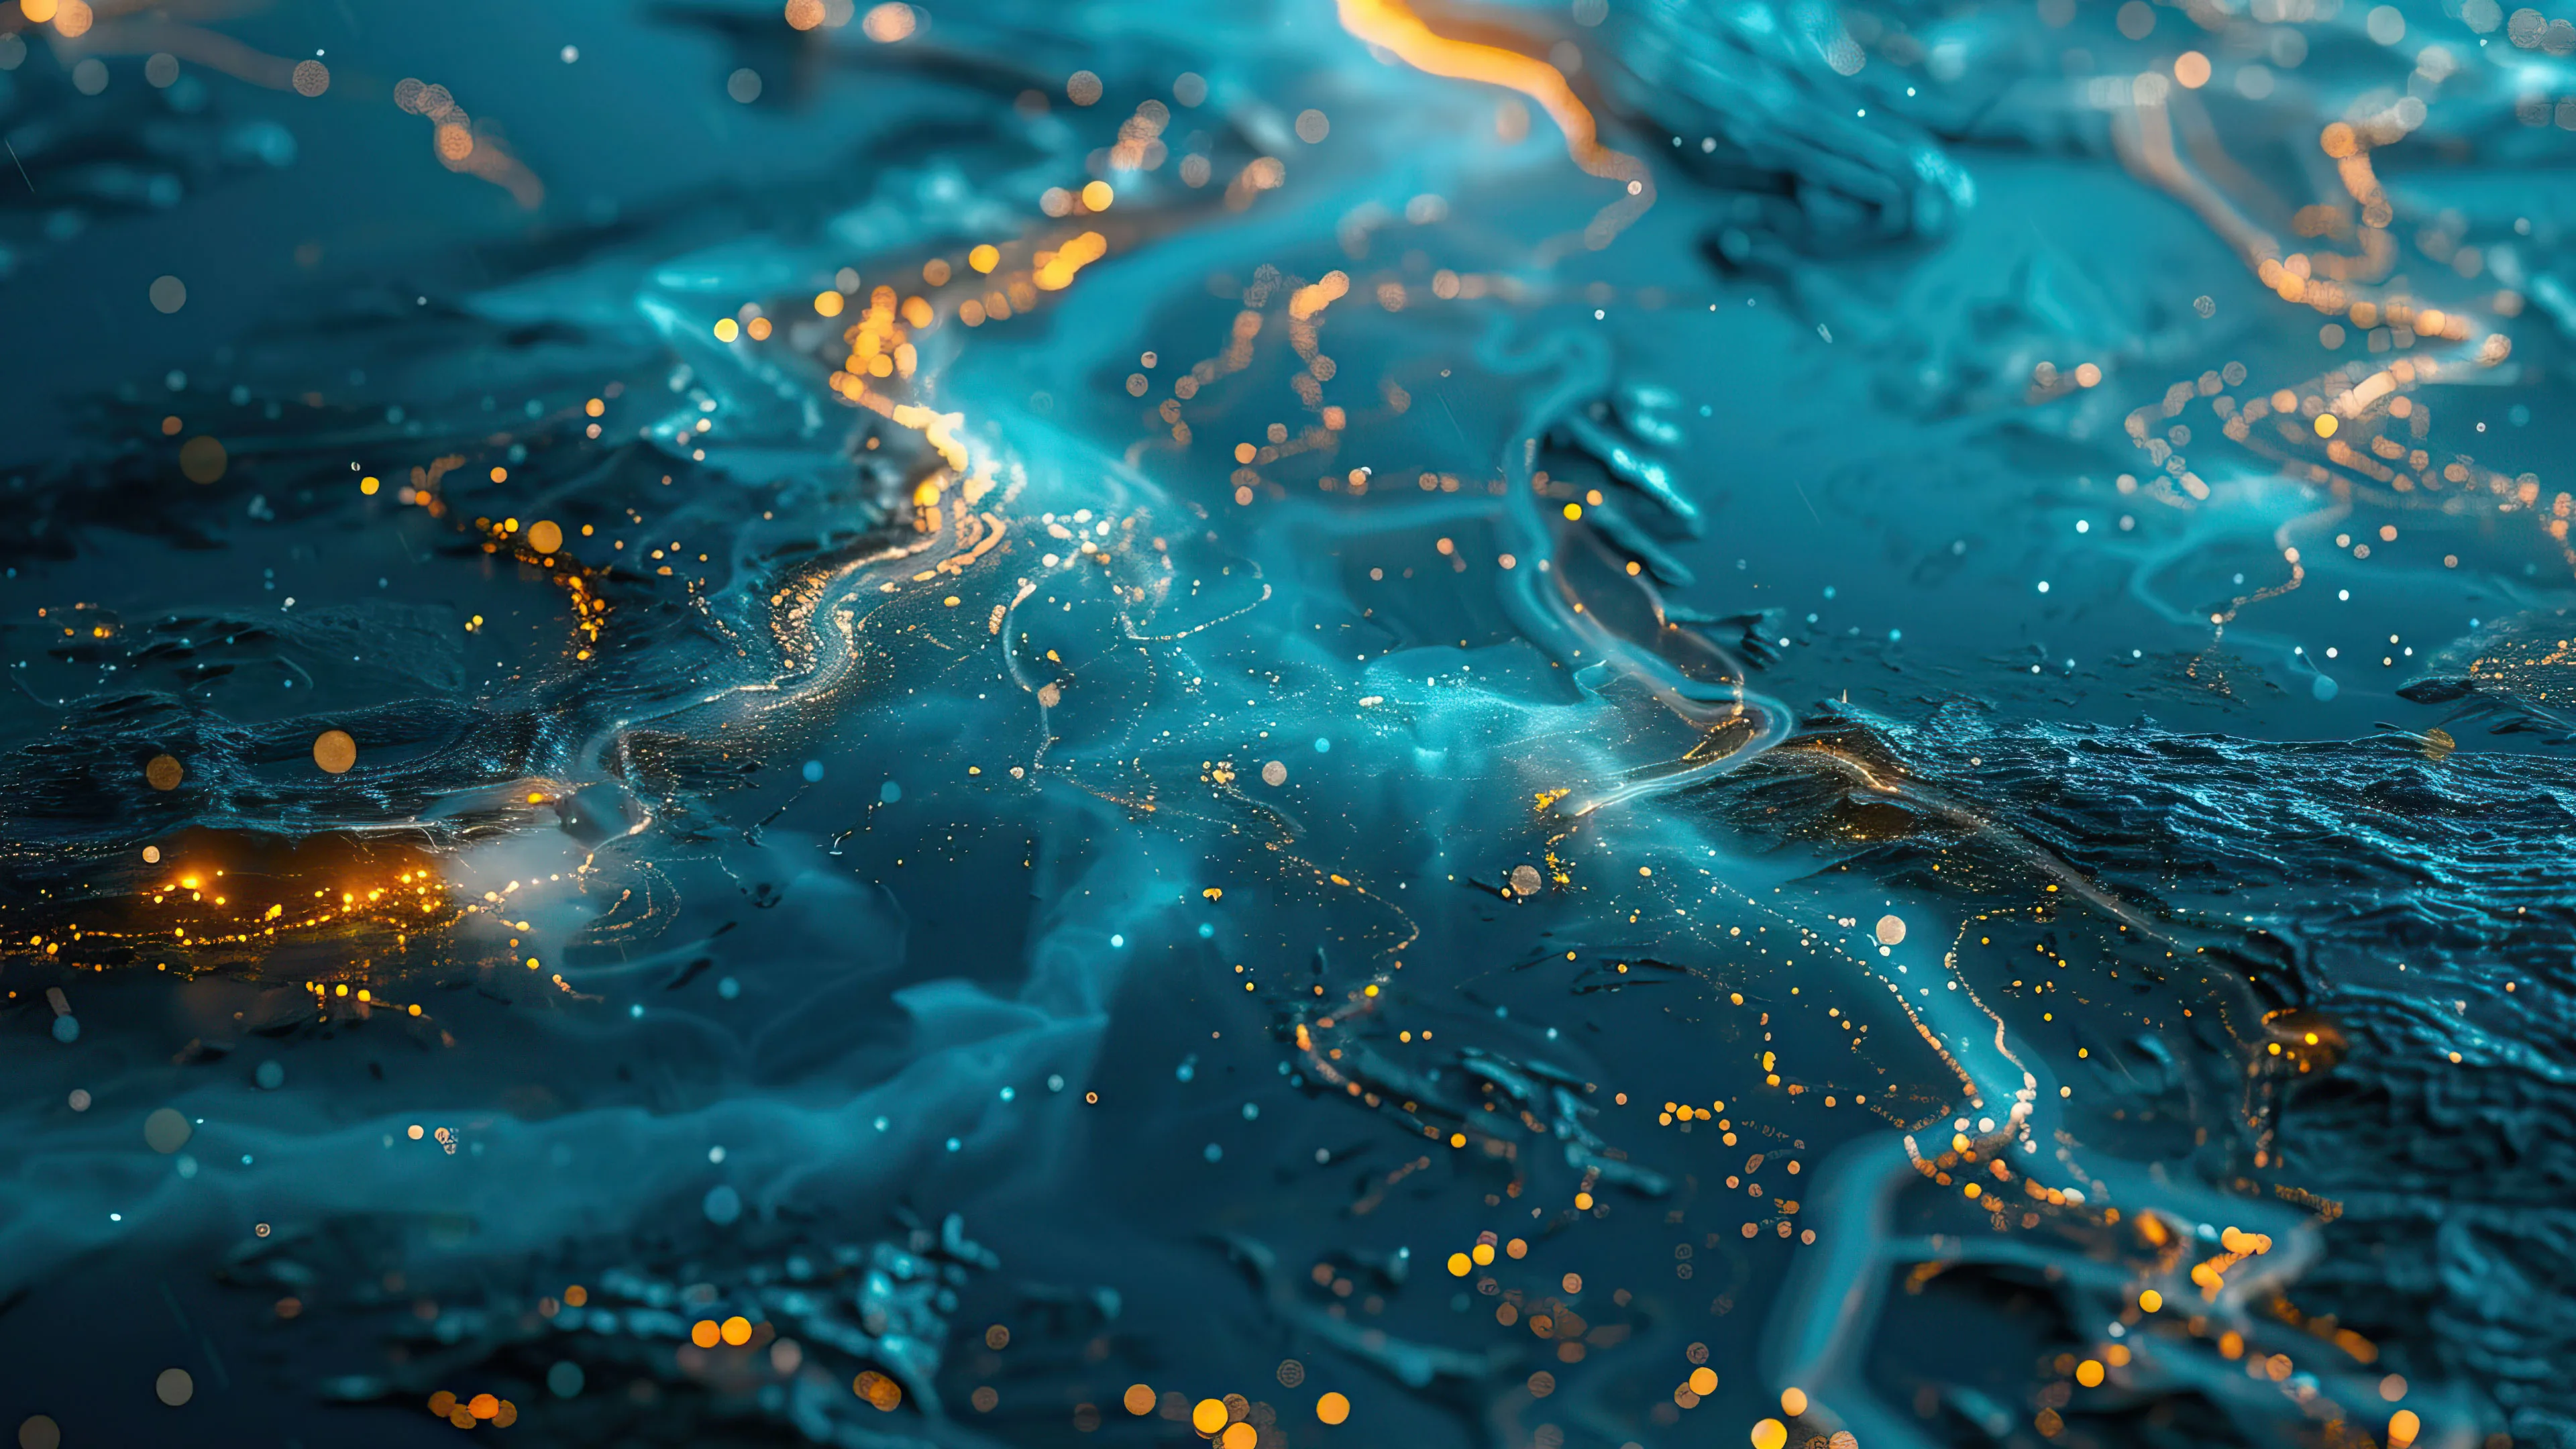 An exquisite 4K PC wallpaper presents a mesmerizing abstract composition featuring golden streams flowing dynamically across the screen. The vibrant hues and fluid lines create a captivating visual experience, making it an ideal choice to enhance your desktop background.